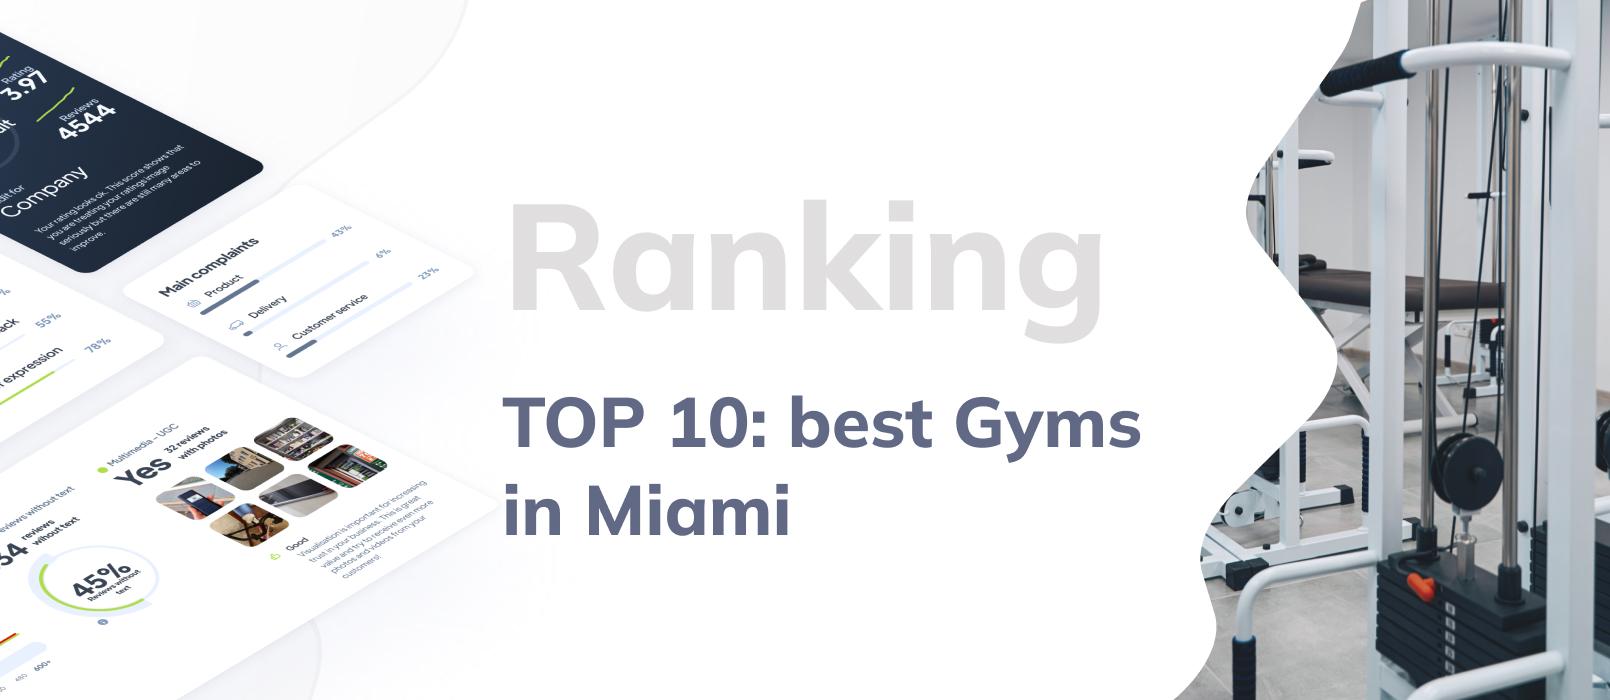 TOP 10 - the Best Gyms in Miami